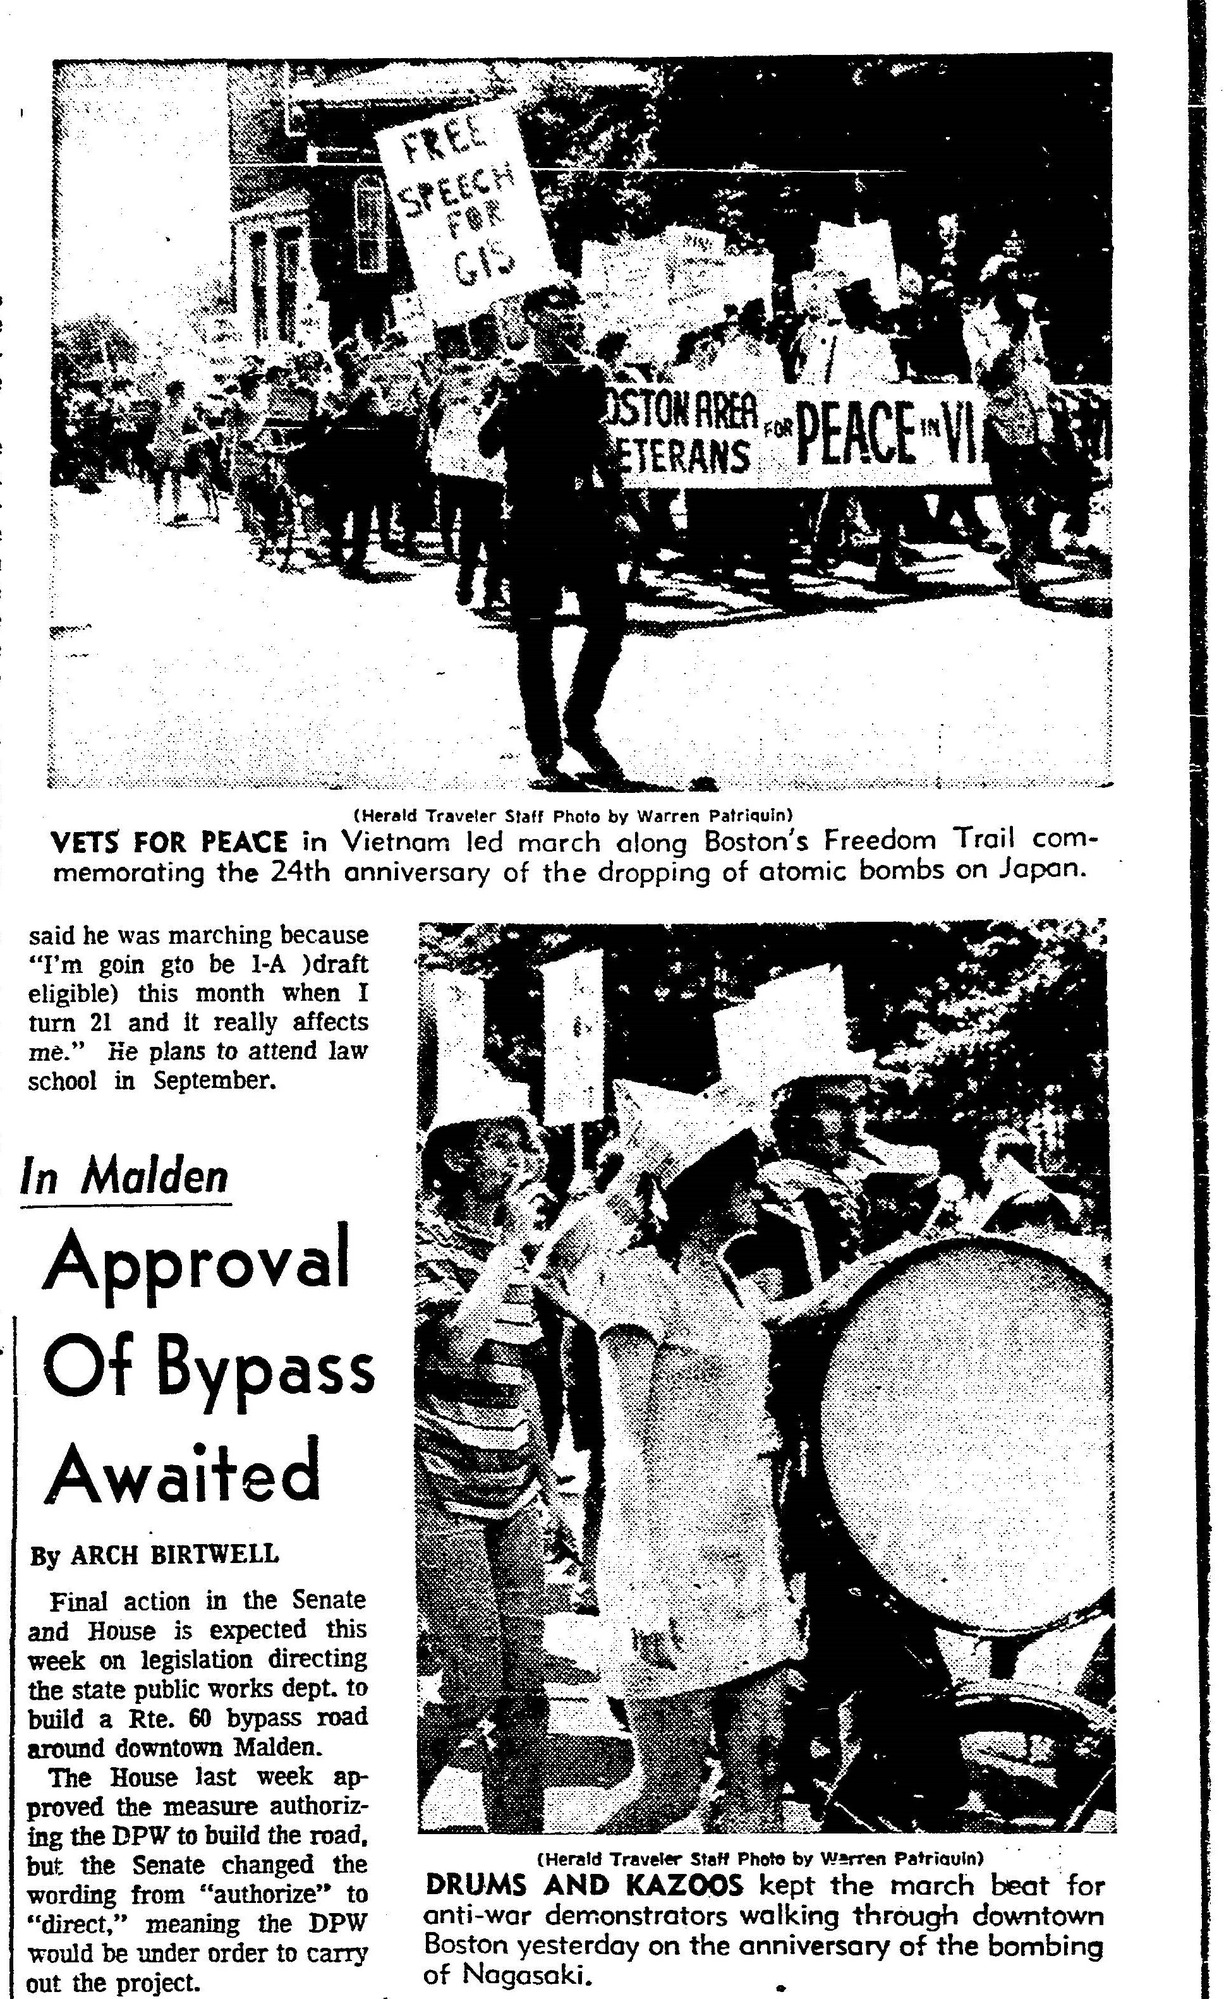 Newspaper image titled Vets for Peace of protestors walking the Freedom Trail.